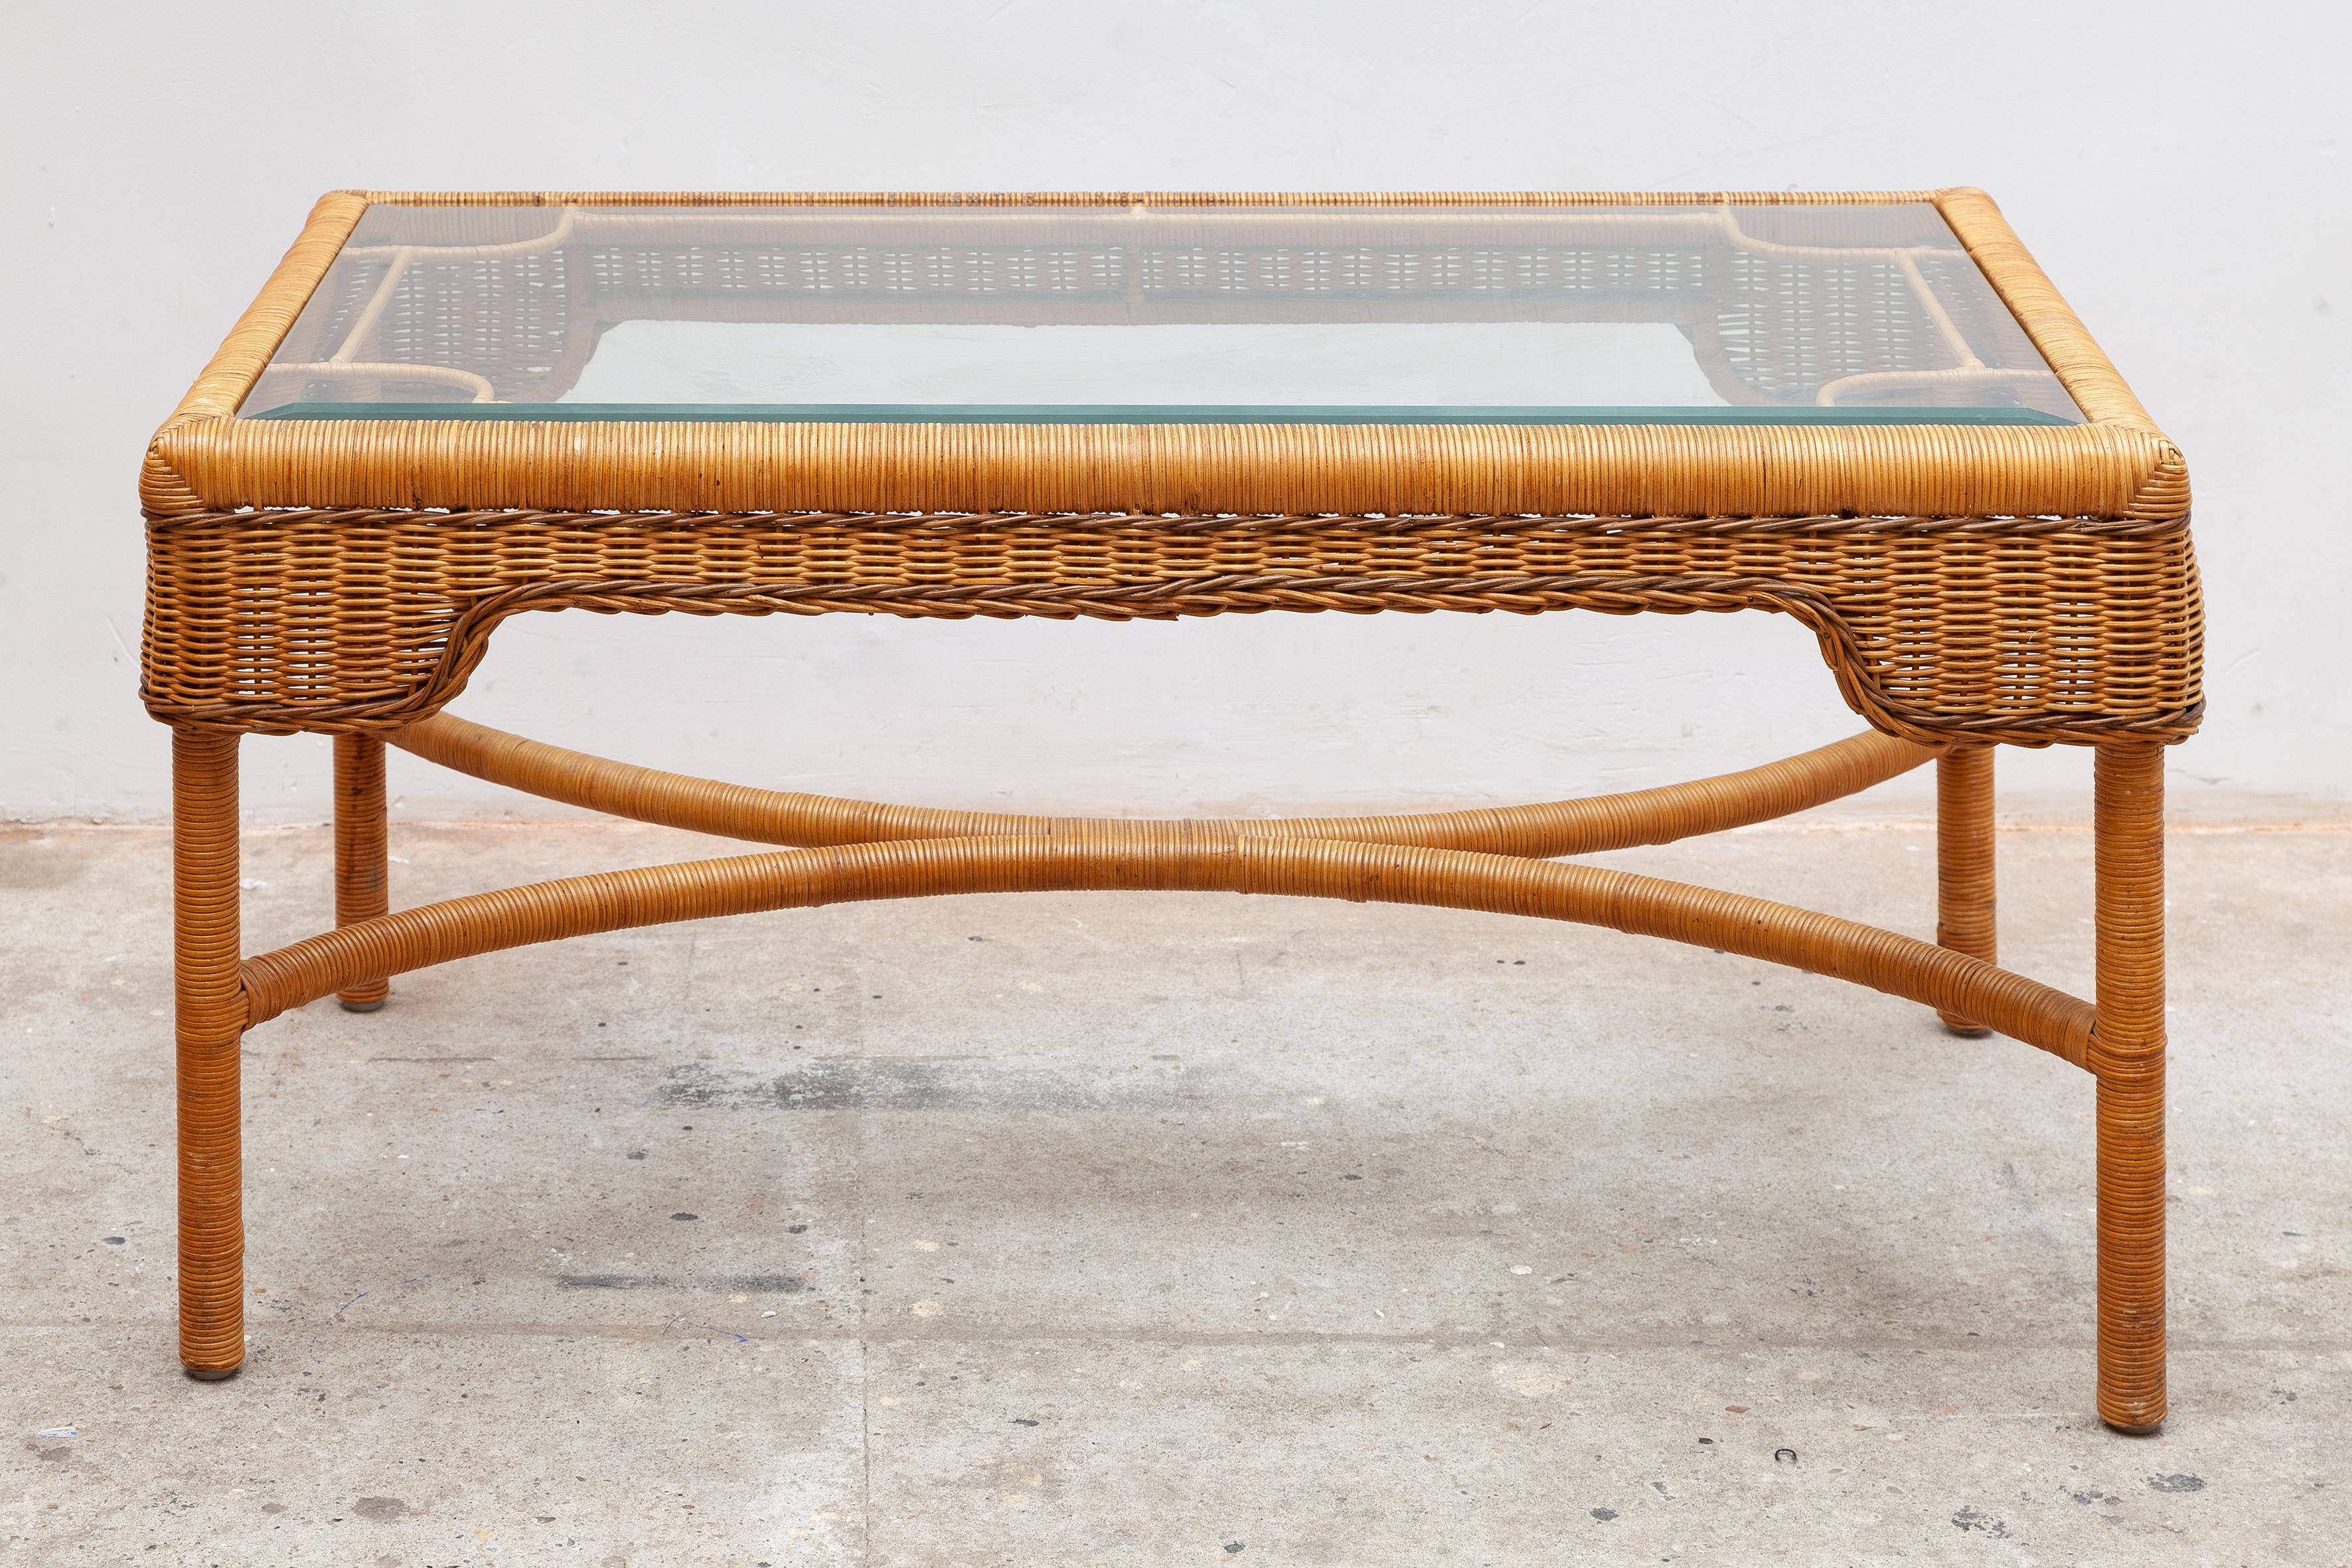 Vintage midcentury rattan coffee table. Elegant lines of the metal frame. The rattan is in excellent condition. Beveled glass top.